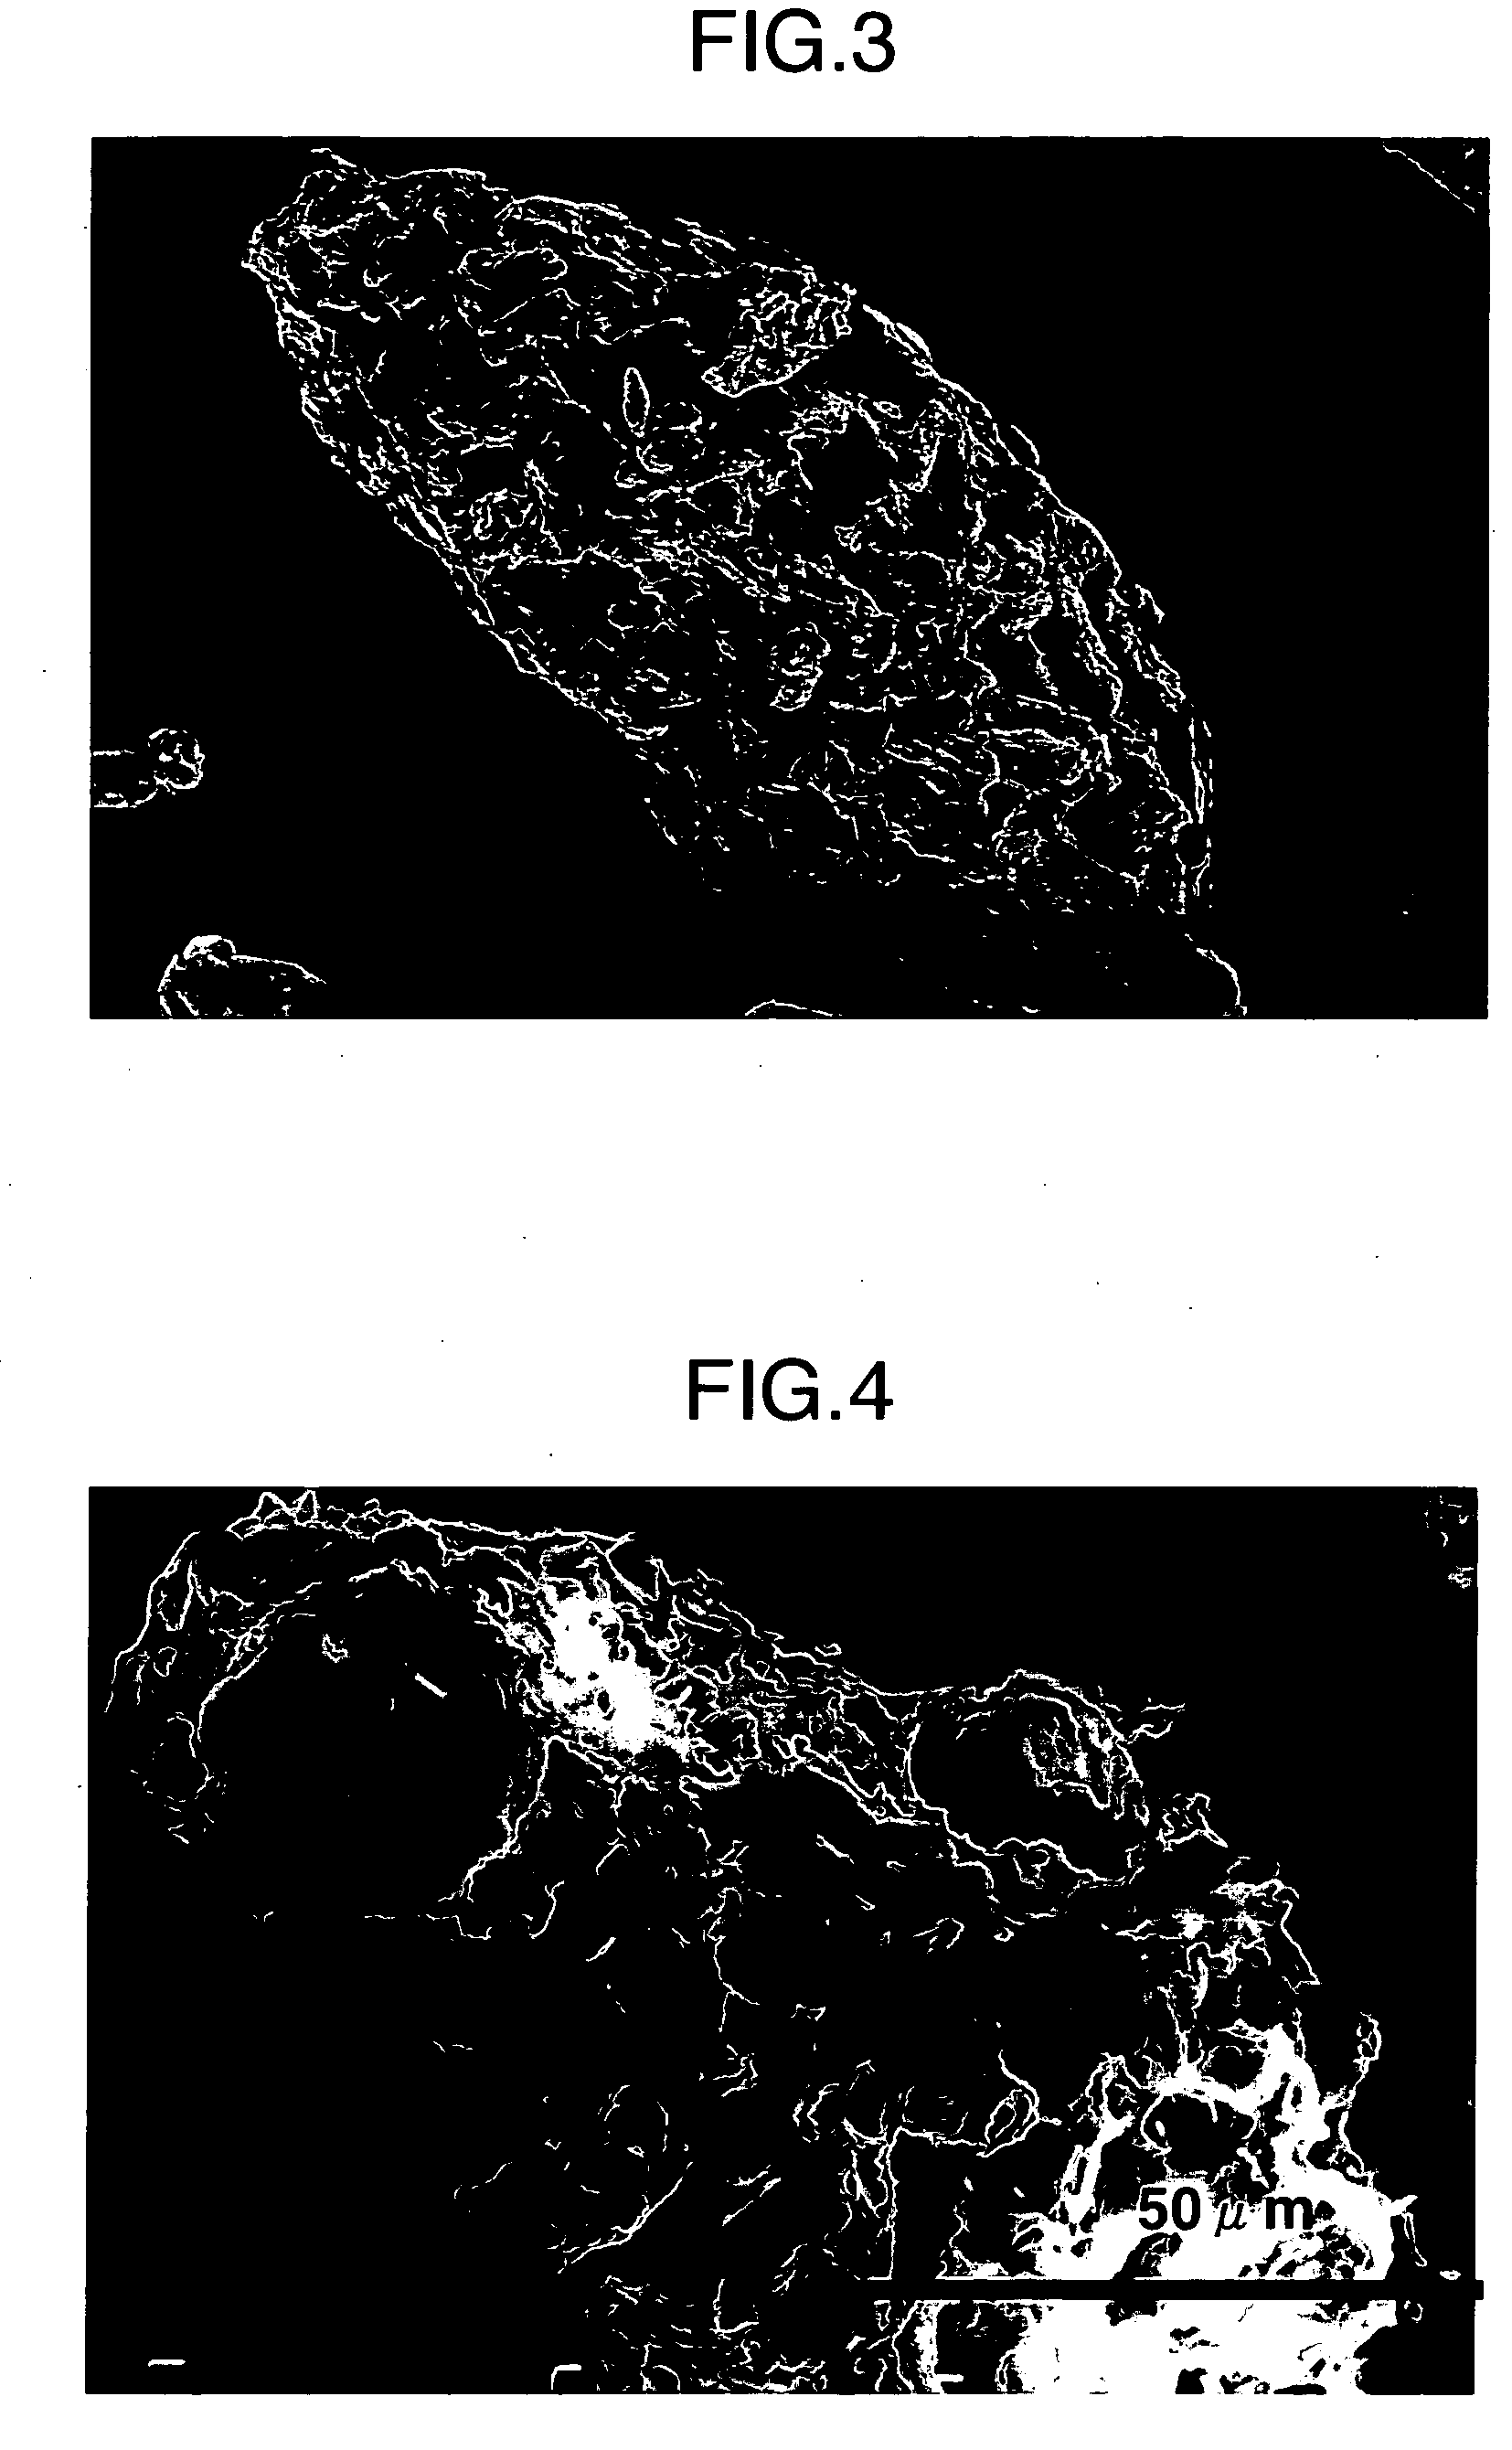 Porous cellulose aggregate and formed product composition comprising the same